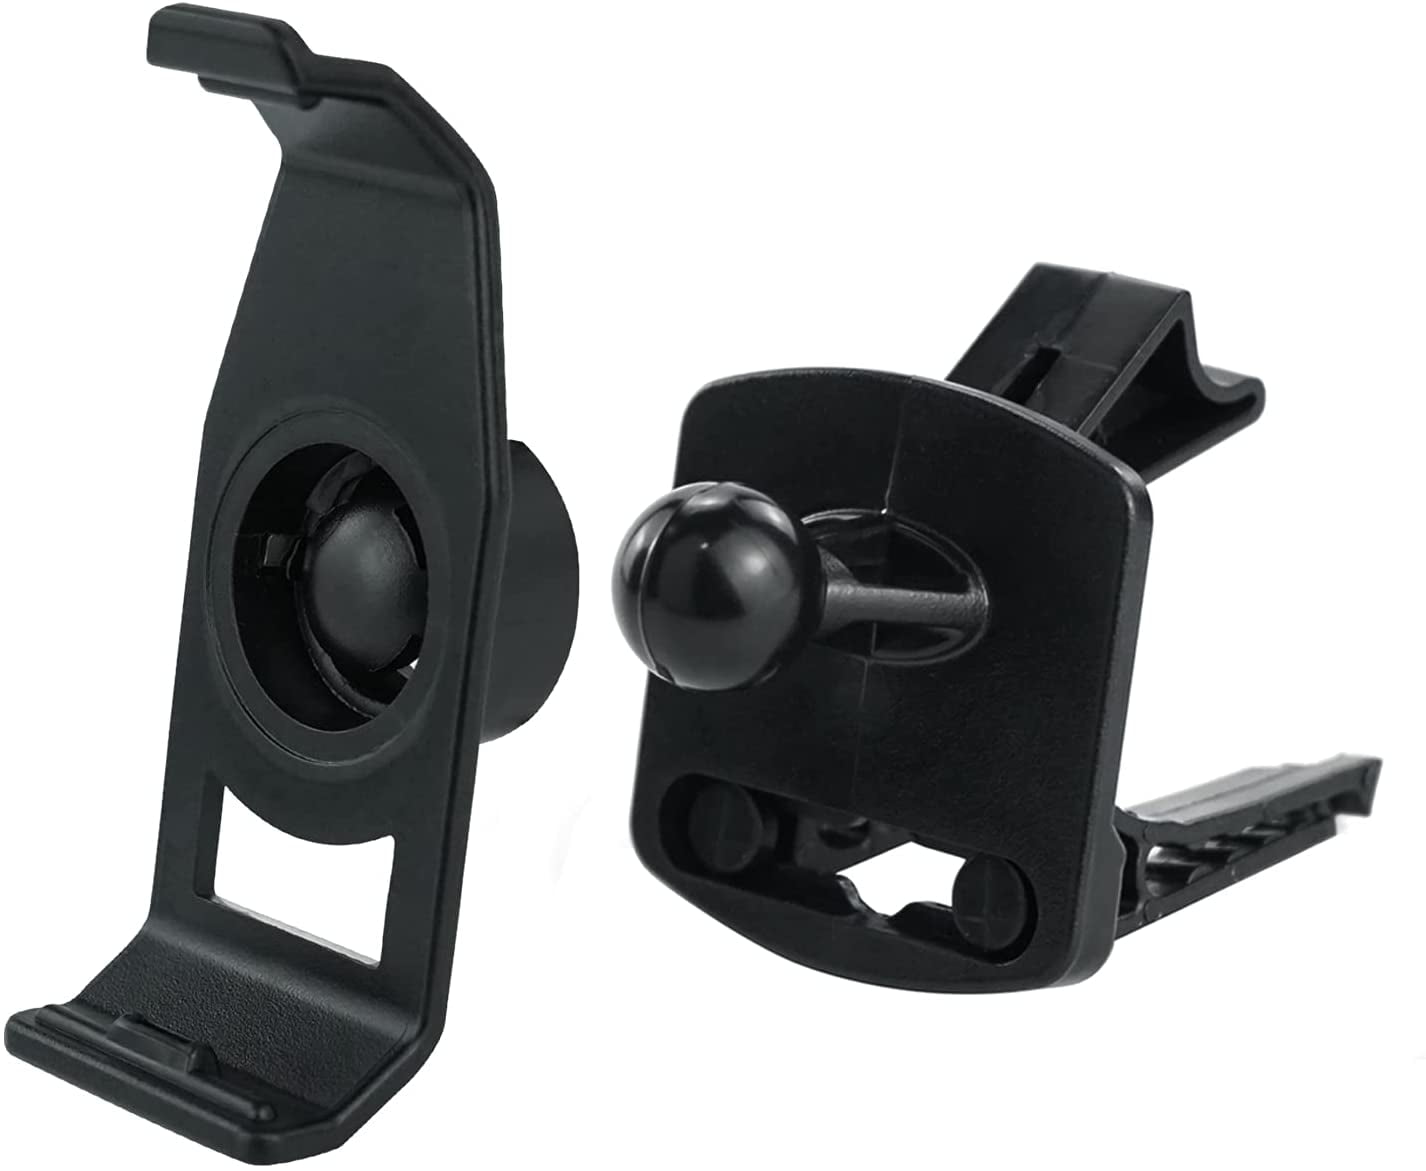 Hot Universal Car Vehicle Air Vent Mount Holder Support Clip For Garmin Nuvi GPS